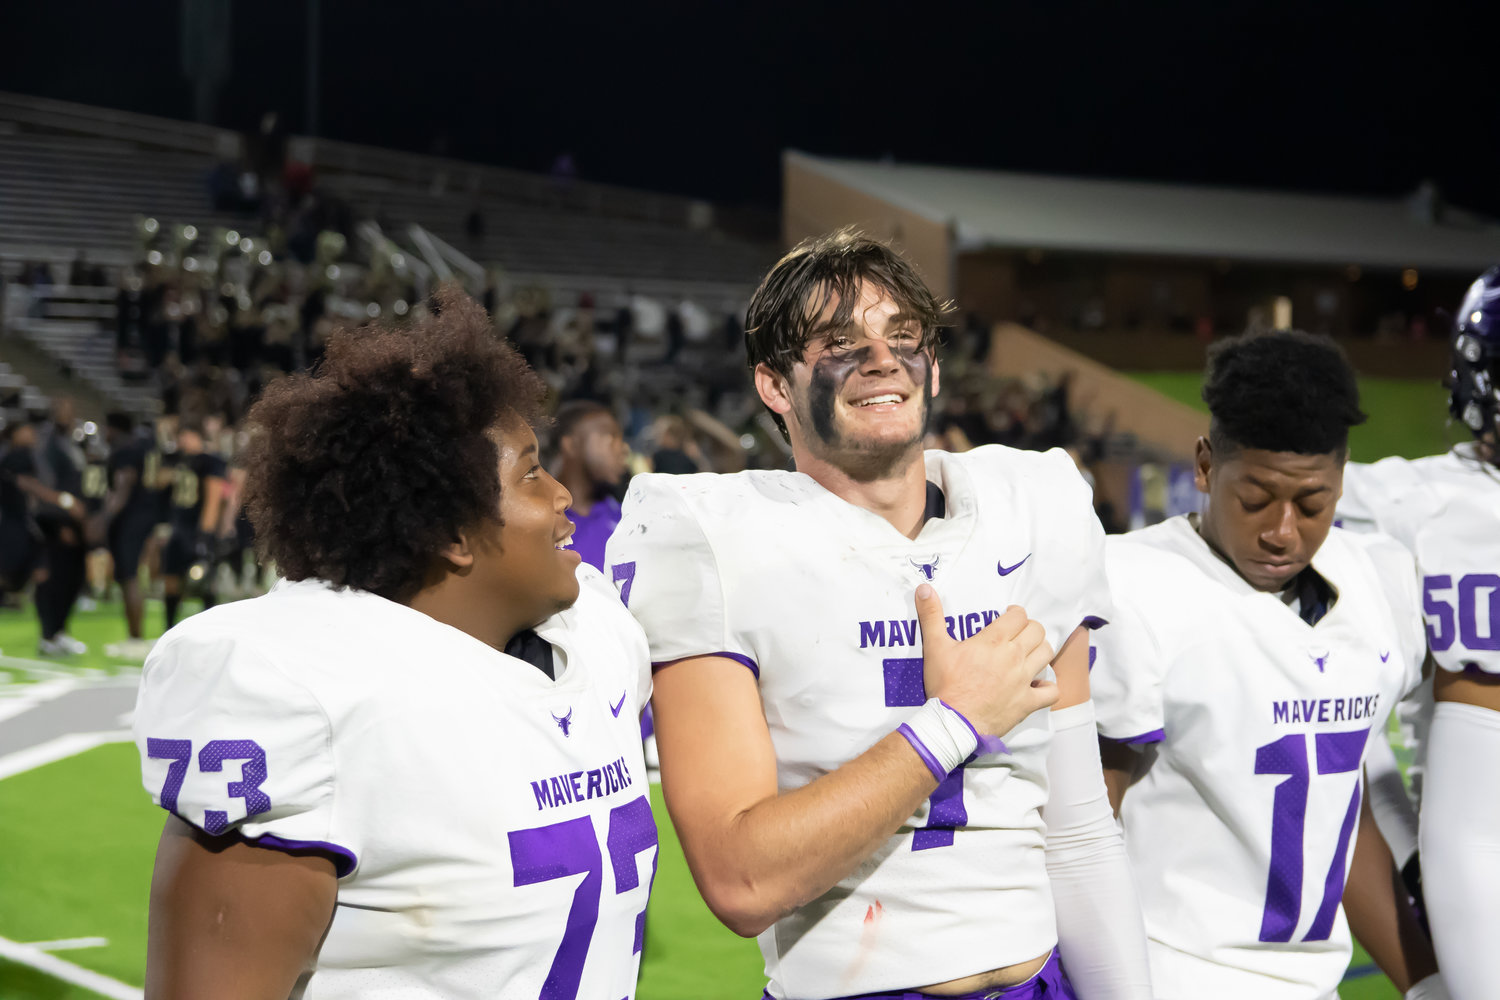 Morton Ranch players celebrate after Thursday's game between Morton Ranch and Jordan at Rhodes Stadium.